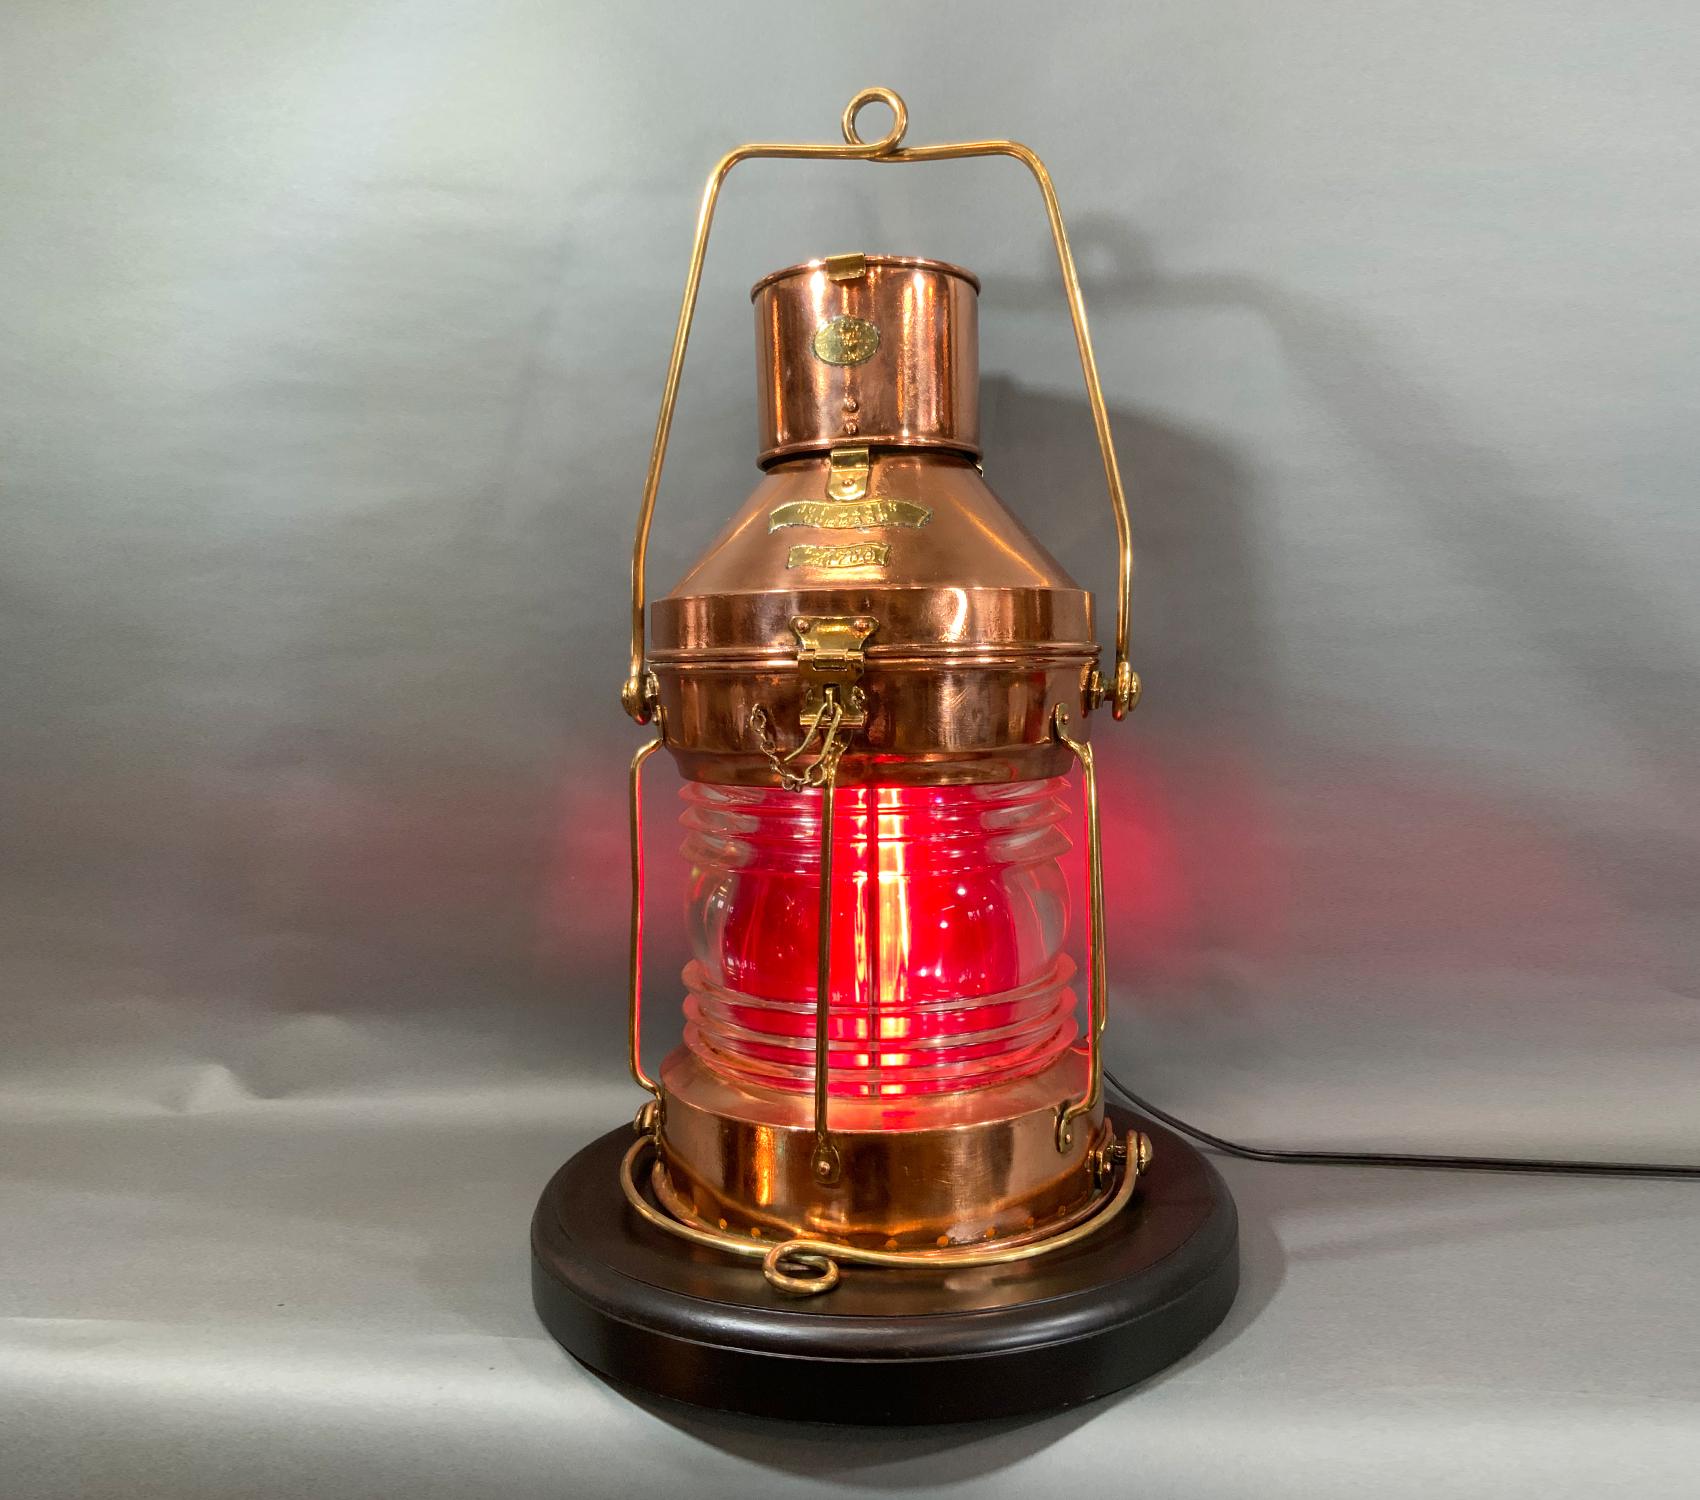 Clear Fresnel glass lens, removable red lens. Fitted to a mahogany base. Brasses include badges, handles, hasp, hinges, bars, etc.

Weight: 16 lbs.
Overall Dimensions: 22